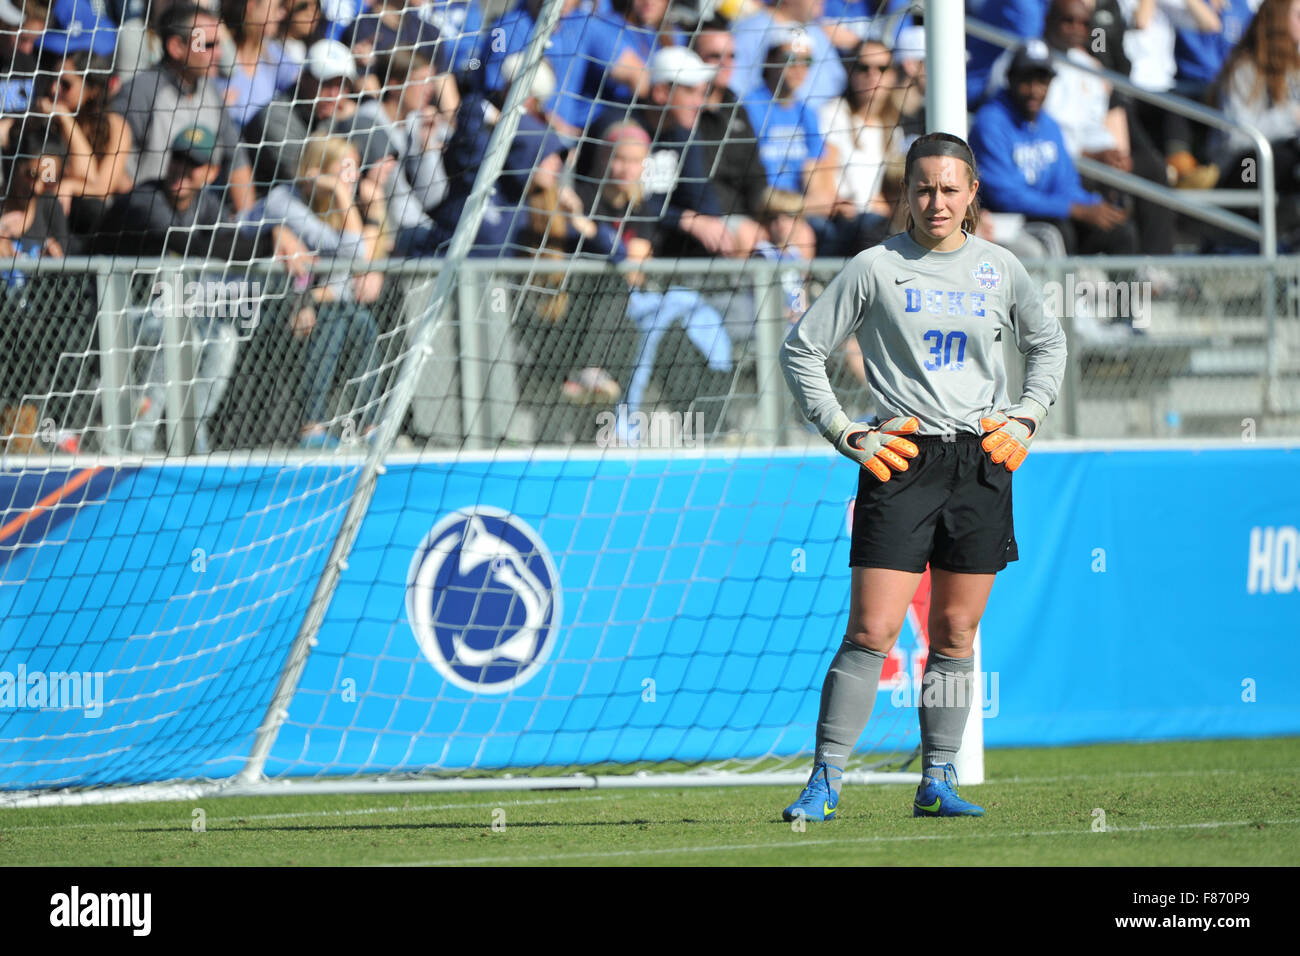 Cary, North Carolina, USA. 6th Dec, 2015. Duke Blue Devils EJ Proctor (30) in action during NCAA Championship soccer game between the Duke Blue Devils and the Penn State Nittany Lions at WakeMed Soccer Park in Cary, North Carolina. Reagan Lunn/CSM/Alamy Live News Stock Photo